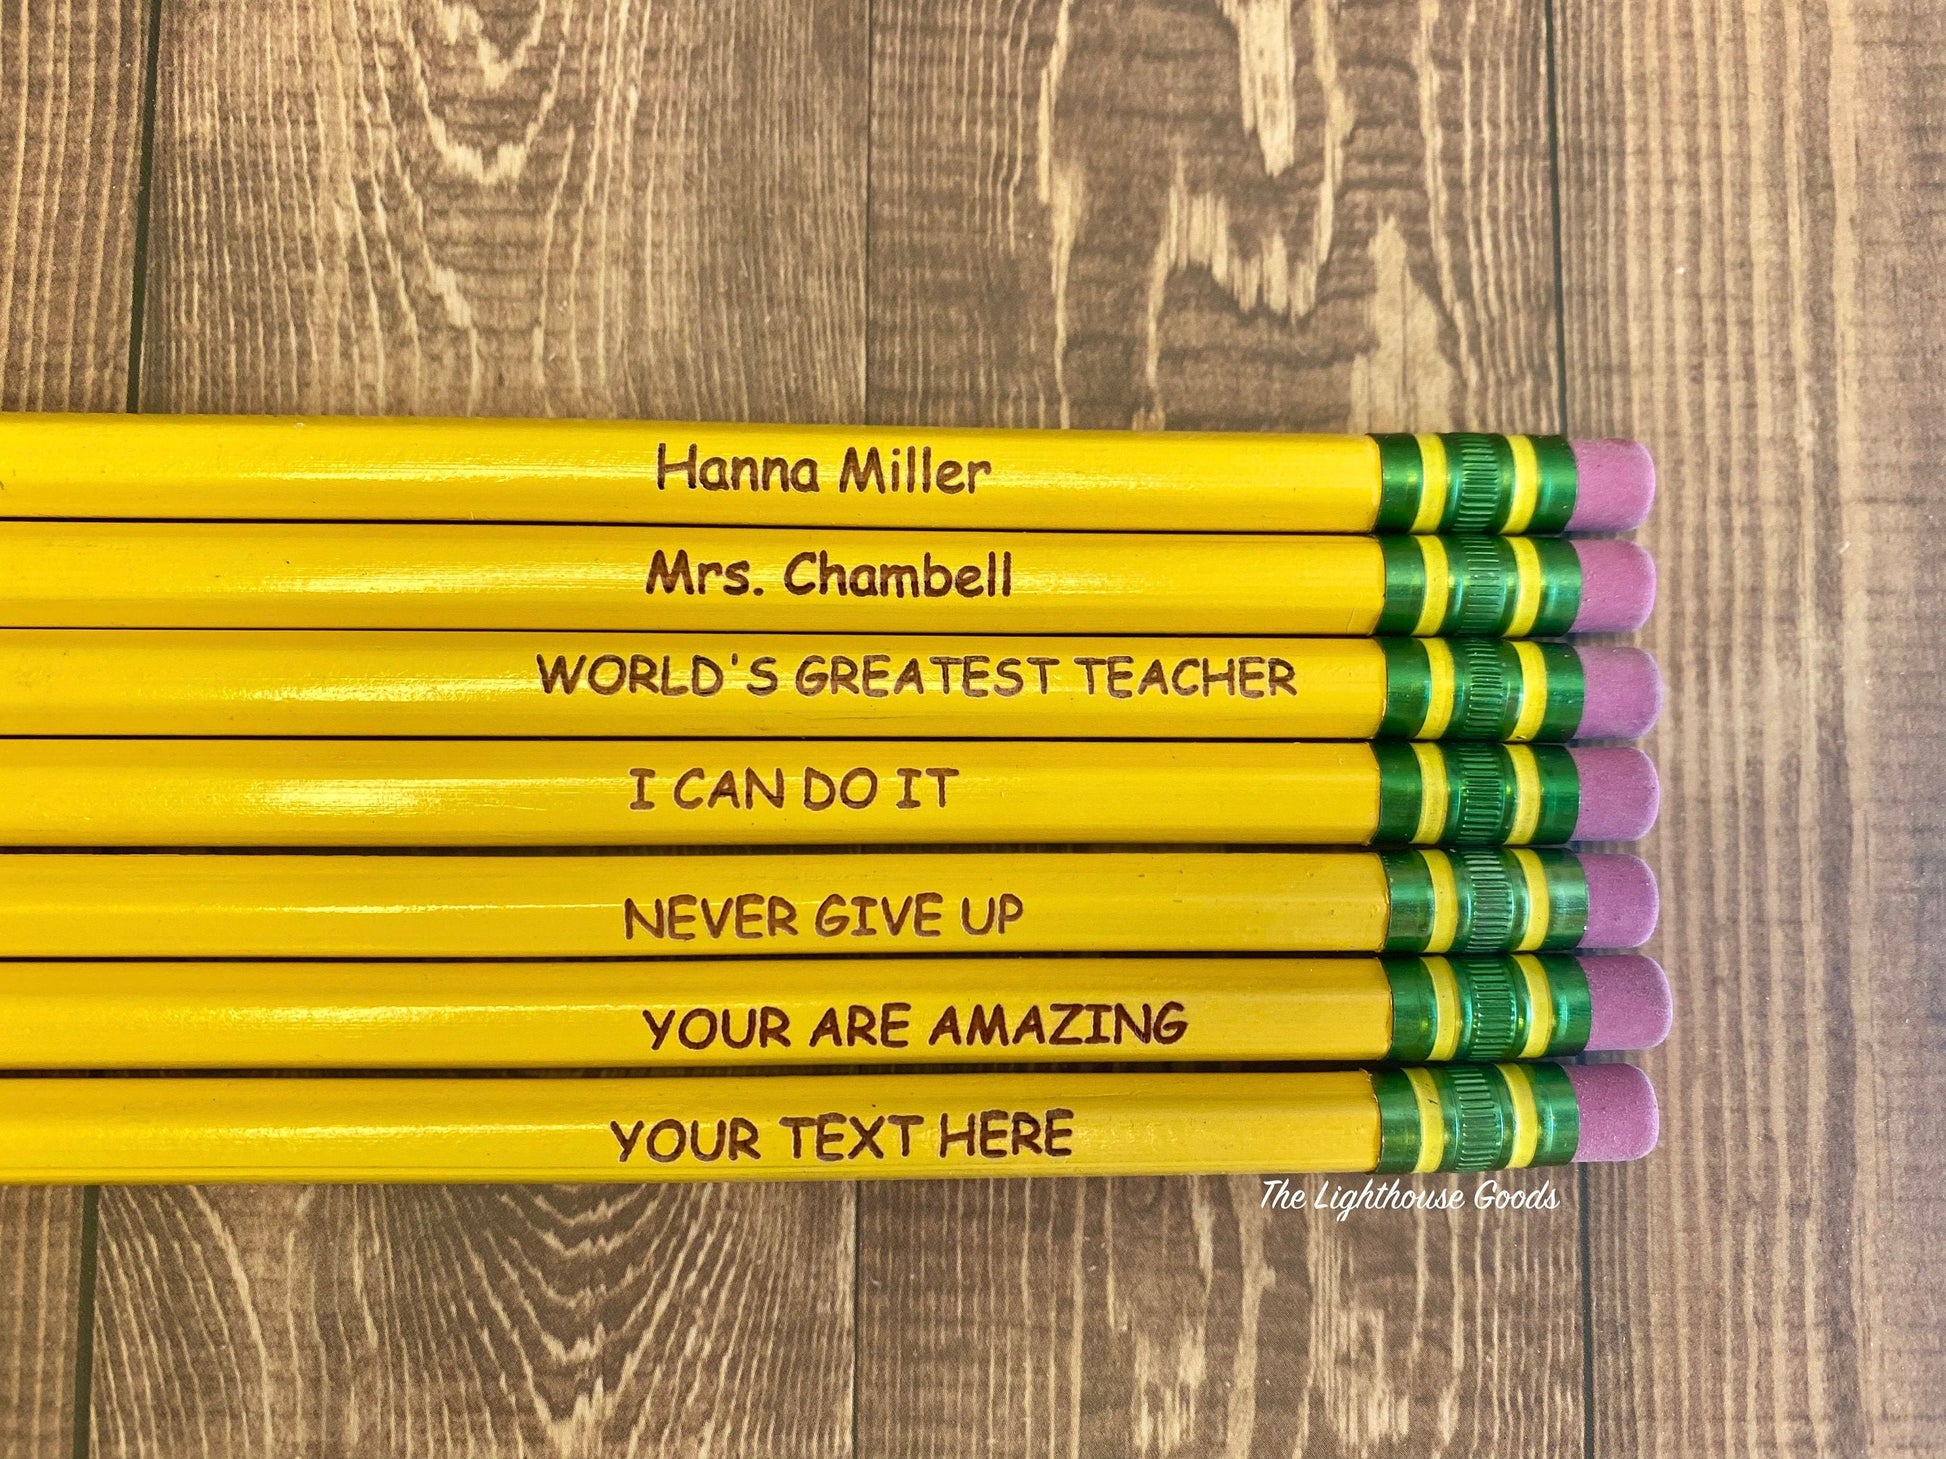 Personalized Pencils Custom Engraved Pencils Back to School Supplies office personalized Teacher Gift Ticonderoga Pencils Student Gift kids